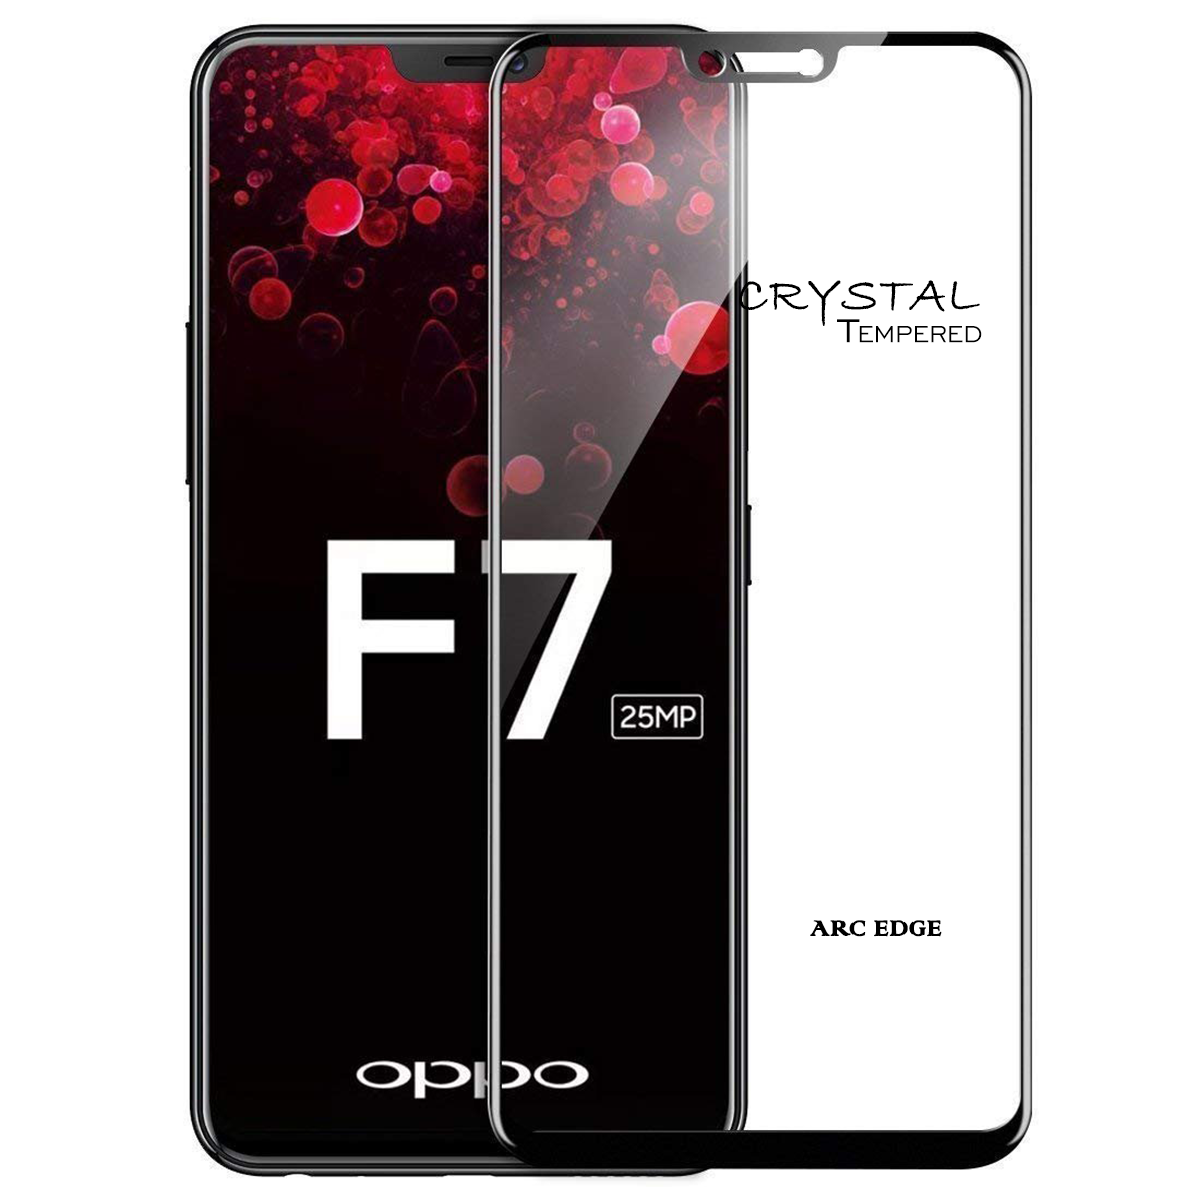 iFix Crystal 5D Tempered Glass for OPPO F7/R15